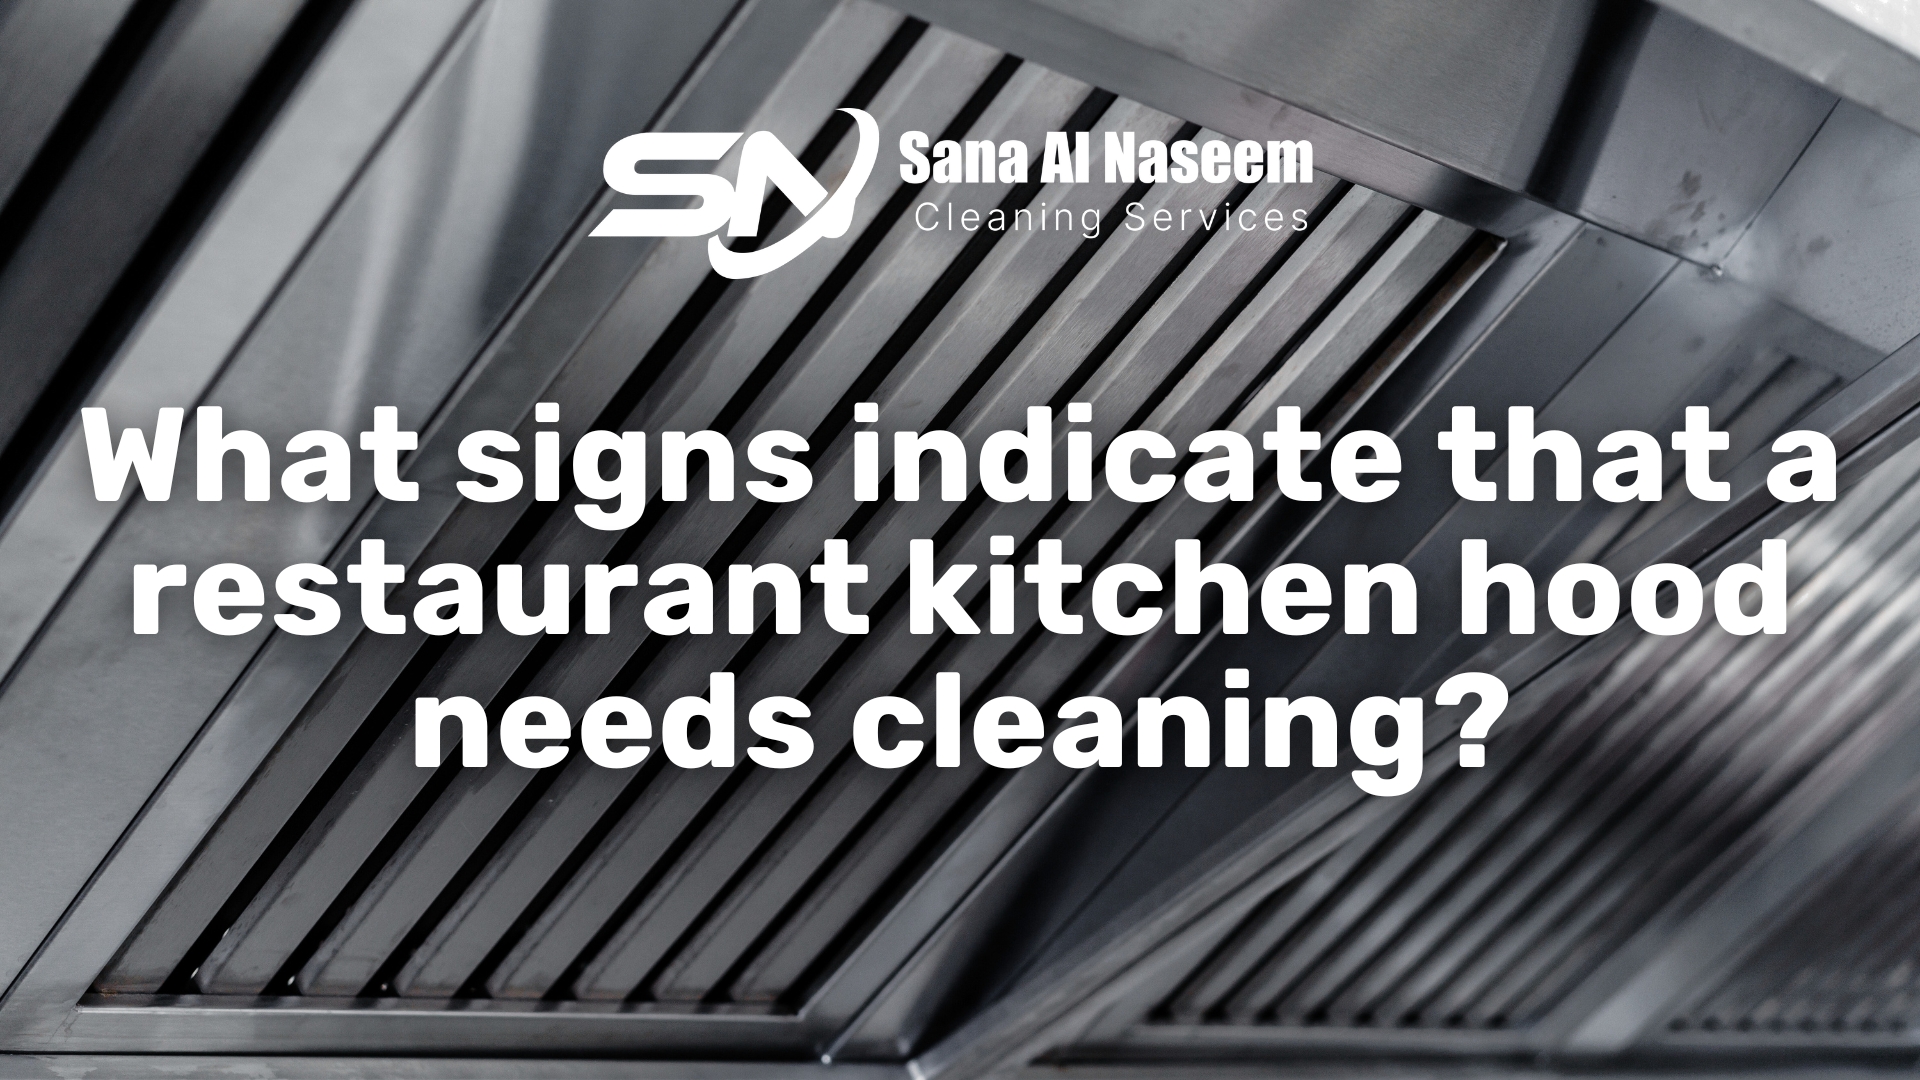 What signs indicate that a restaurant kitchen hood needs cleaning